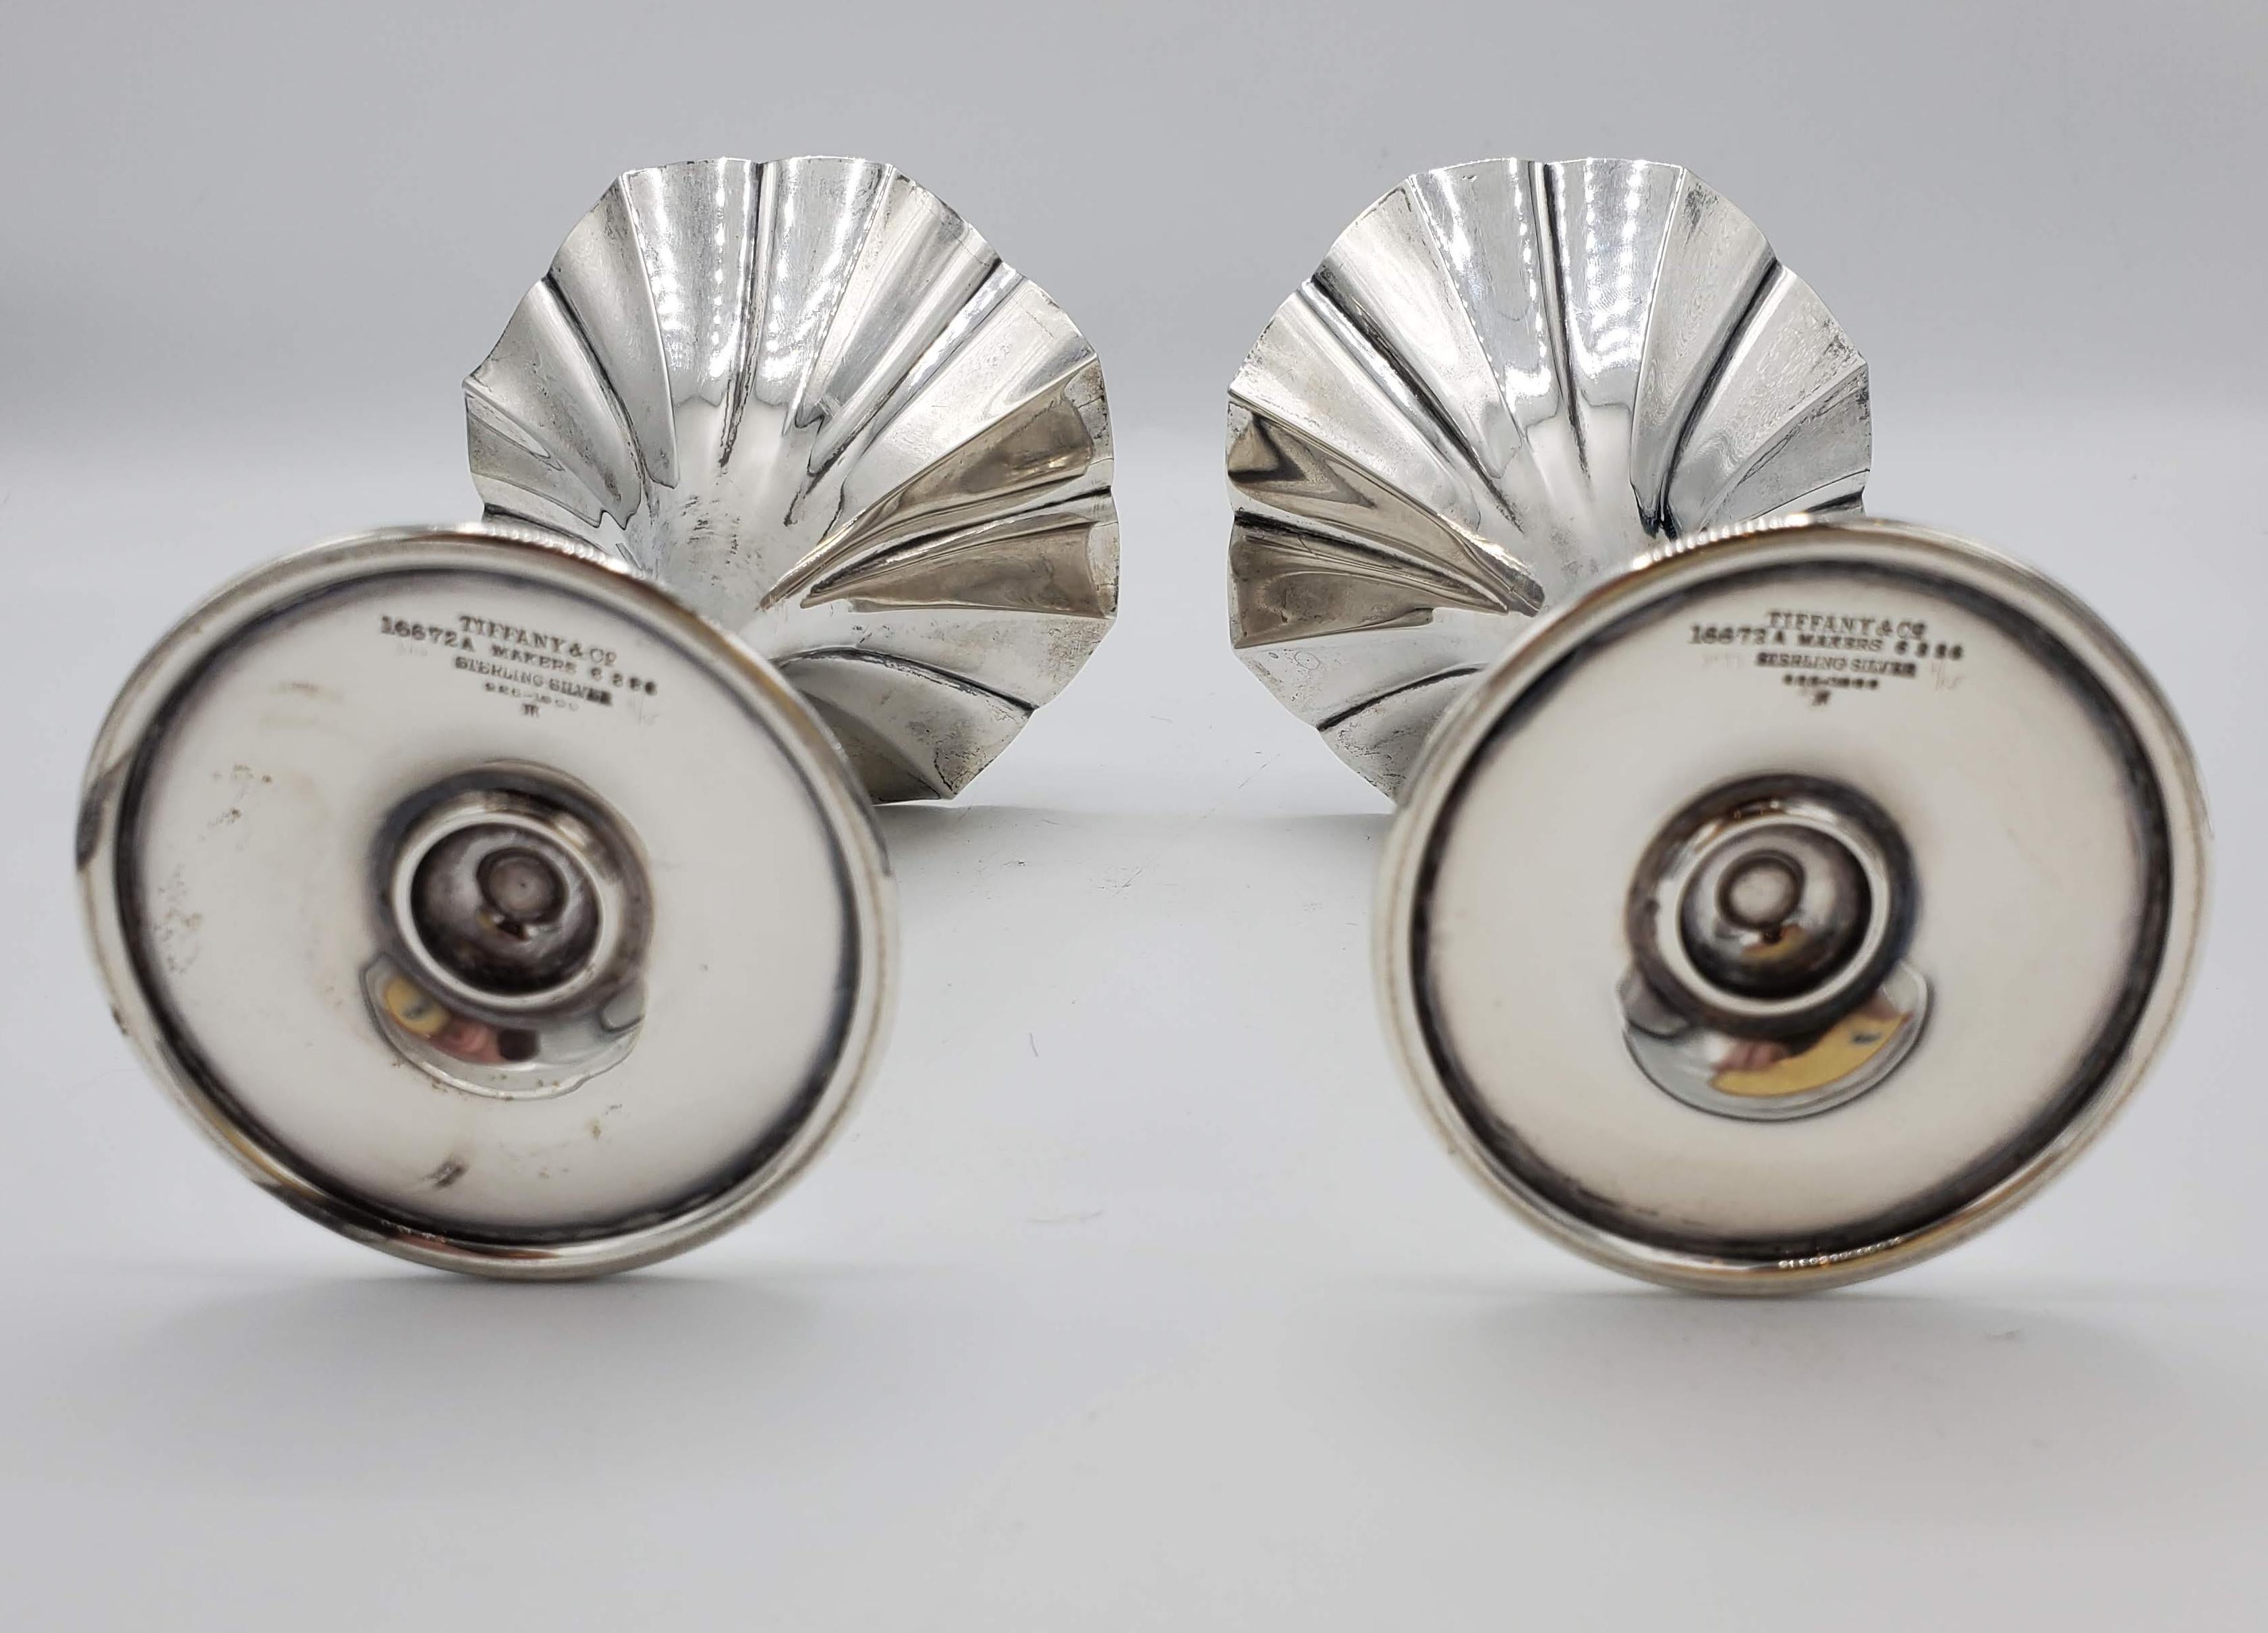 20th Century Pair of Small Tiffany & Co. Art Nouveau Sterling Silver Flower Shaped Vases